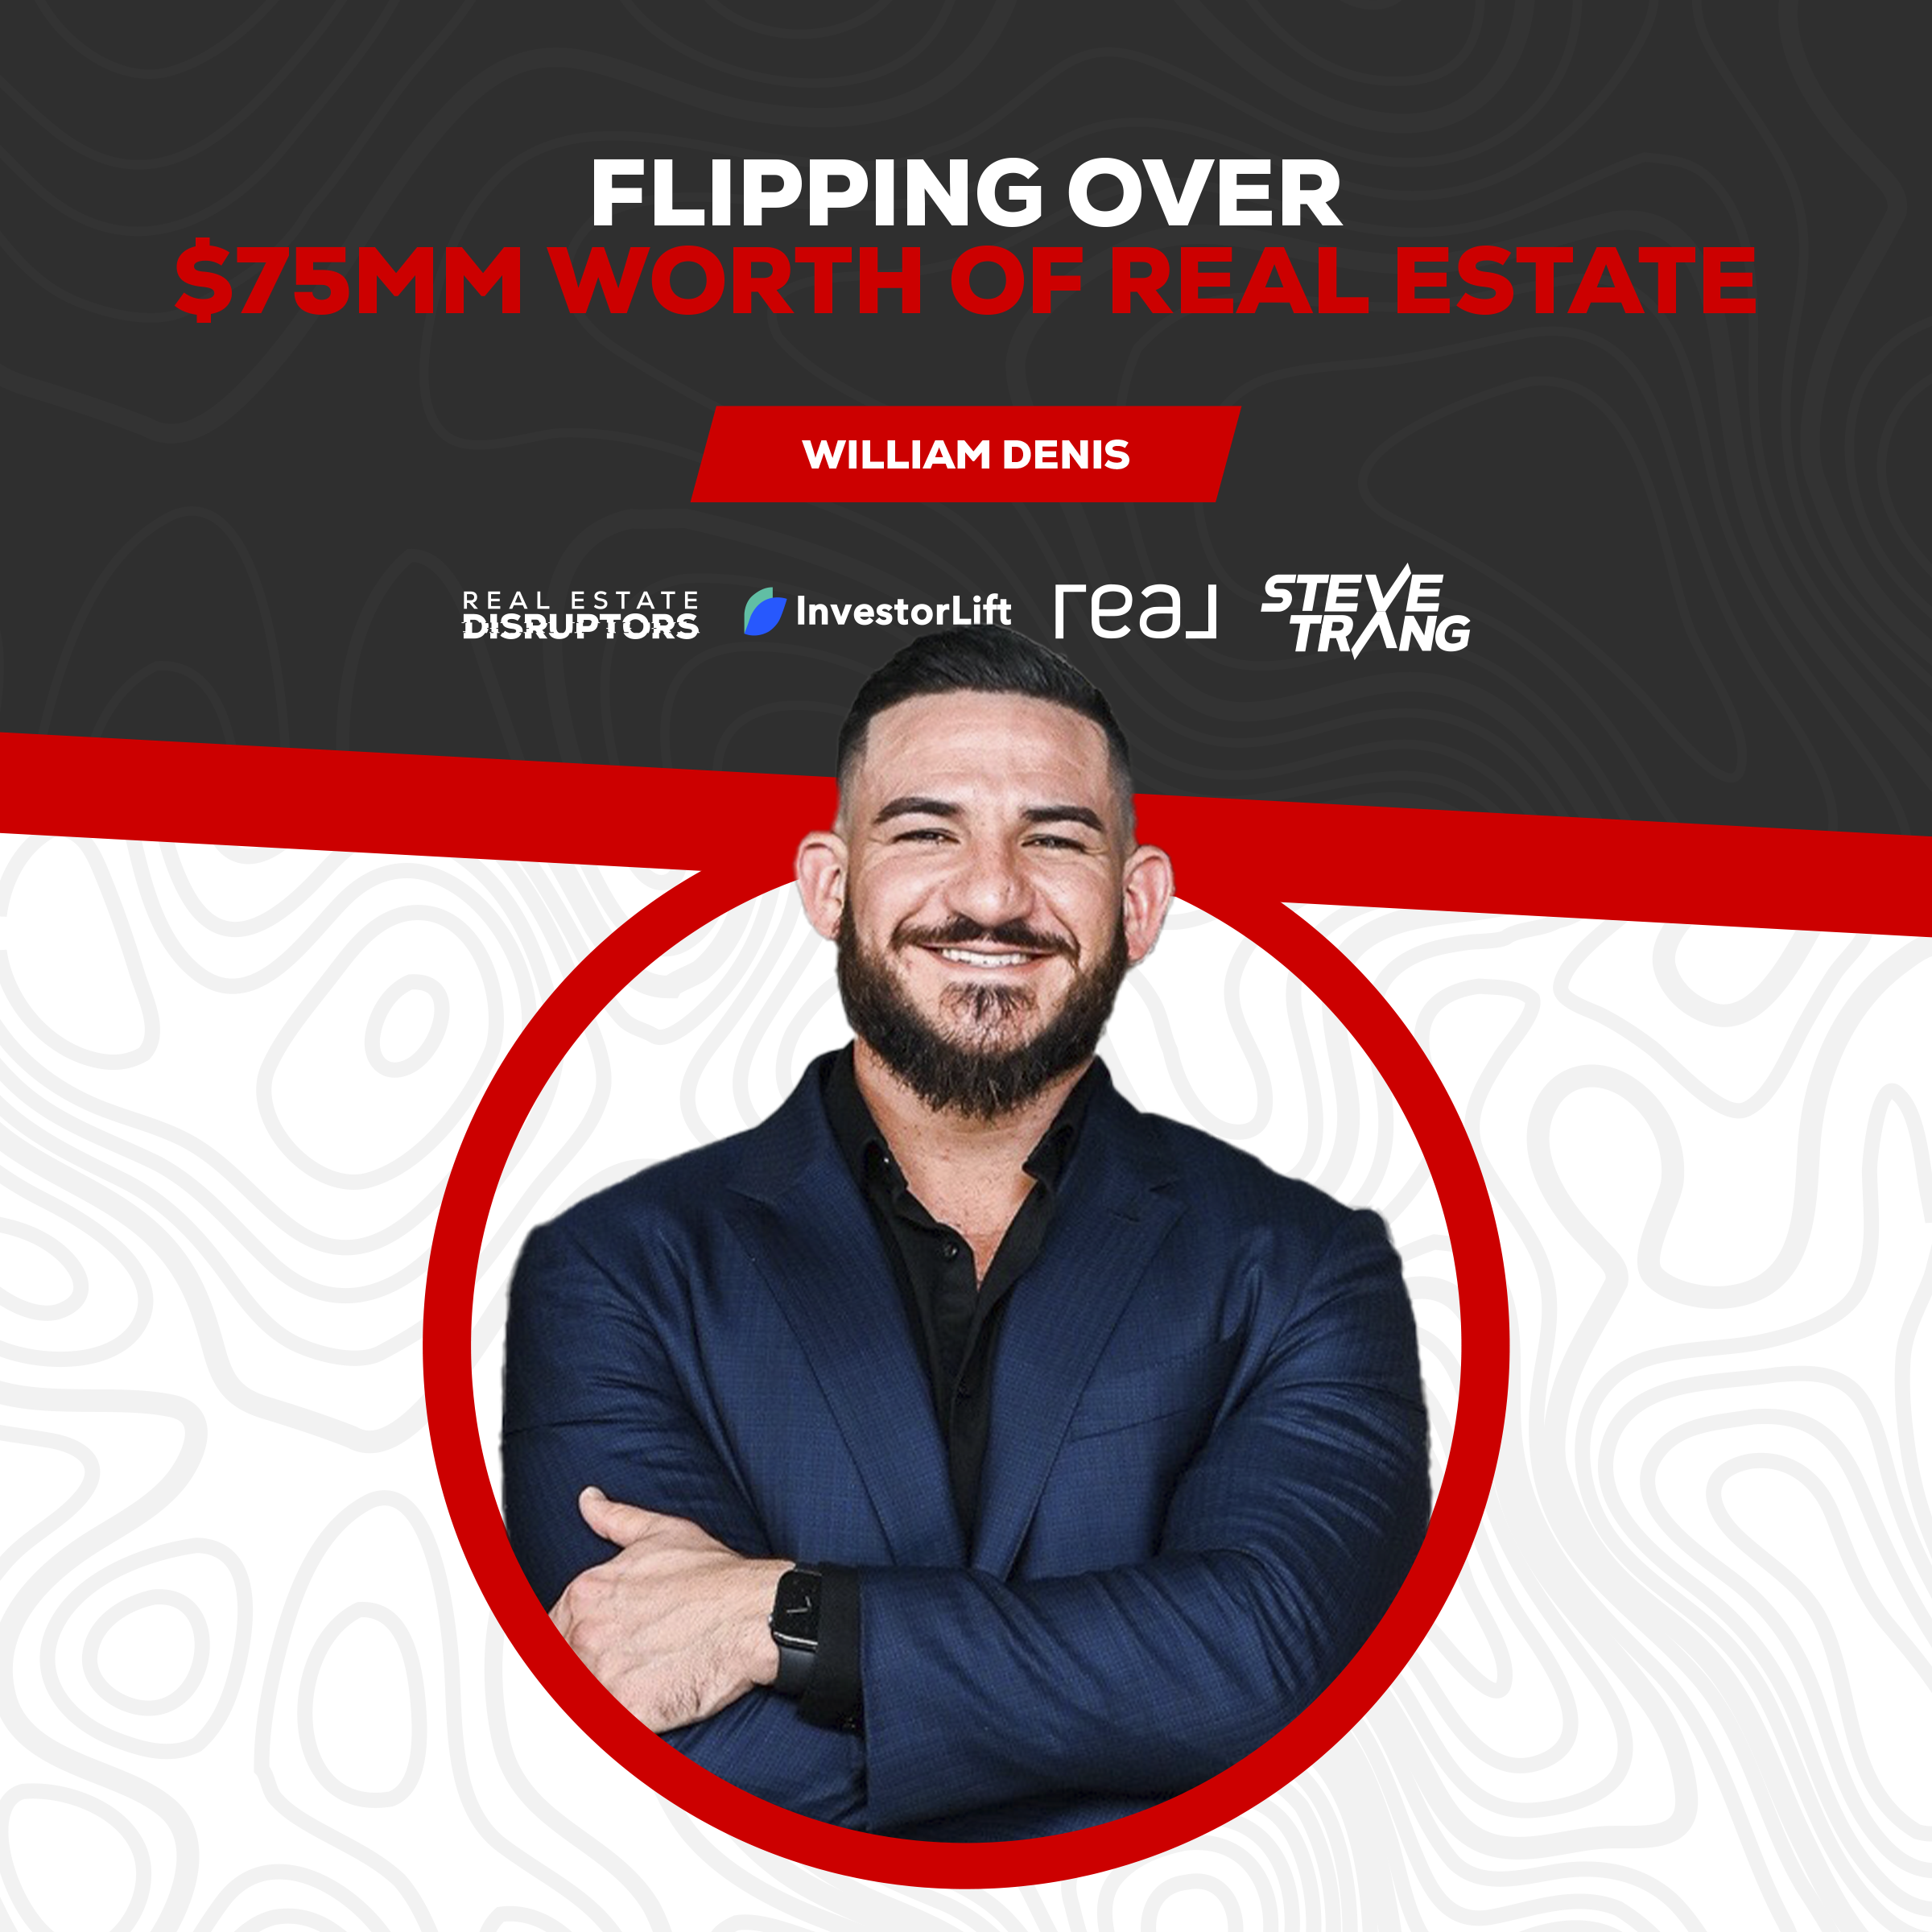 Flipping Over $75MM Worth Of Real Estate